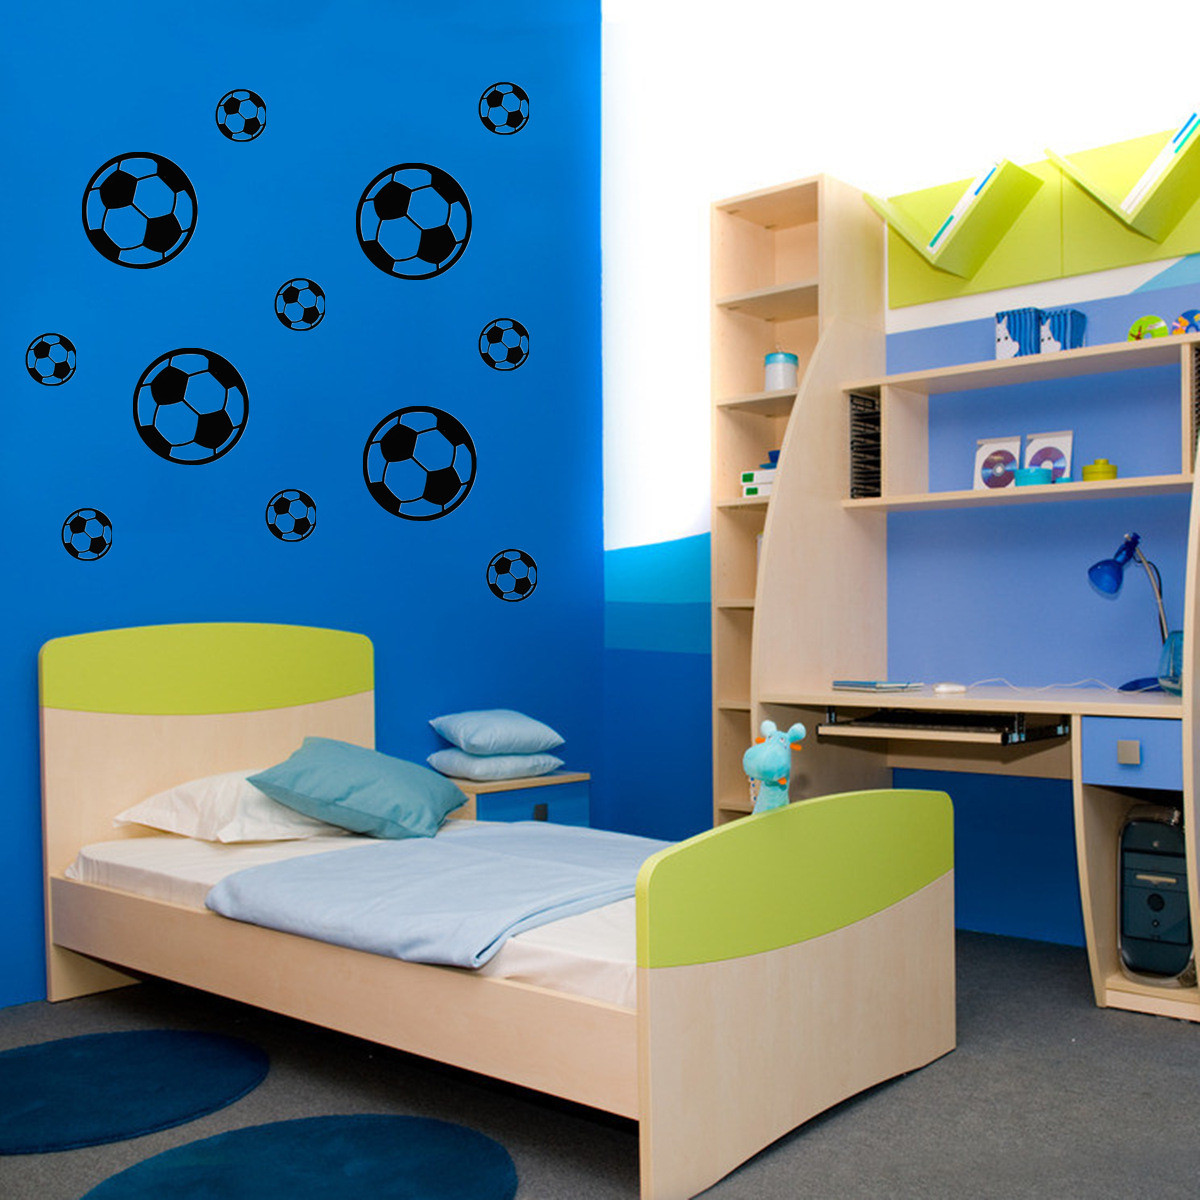 12PcsSet-Football-Soccer-Wall-Stickers-Children-Nursery-Kids-Room-Decals-Gift-Home-Decorations-1470248-10